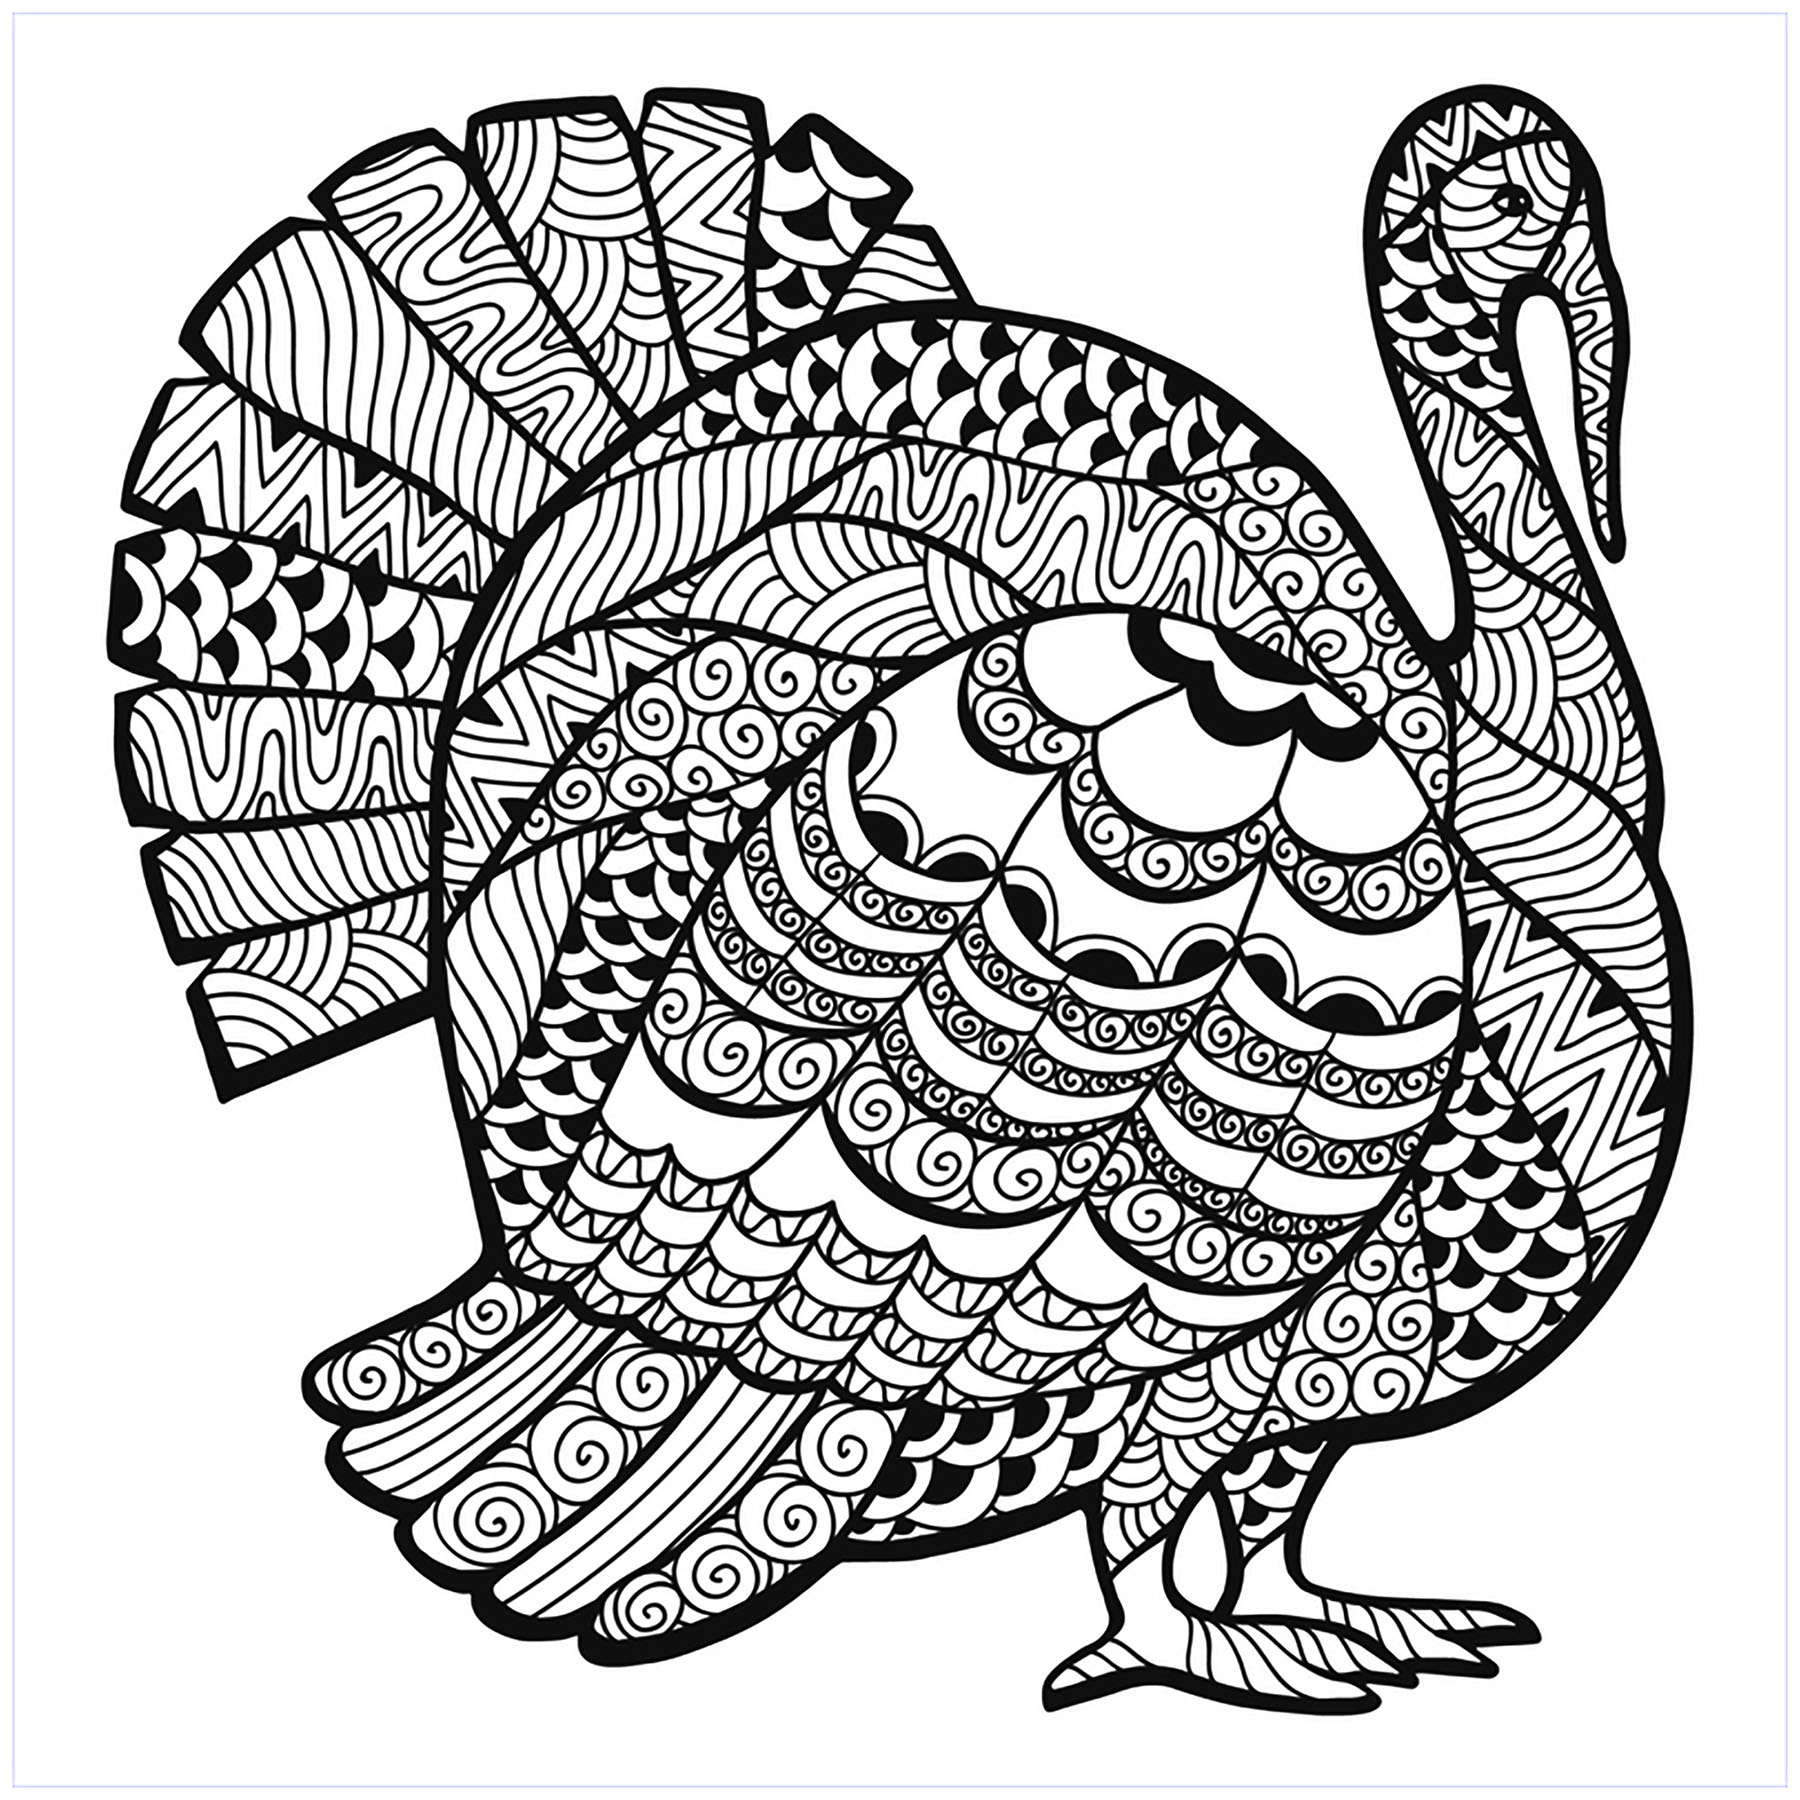 Thanksgiving free to color for children - Thanksgiving ...